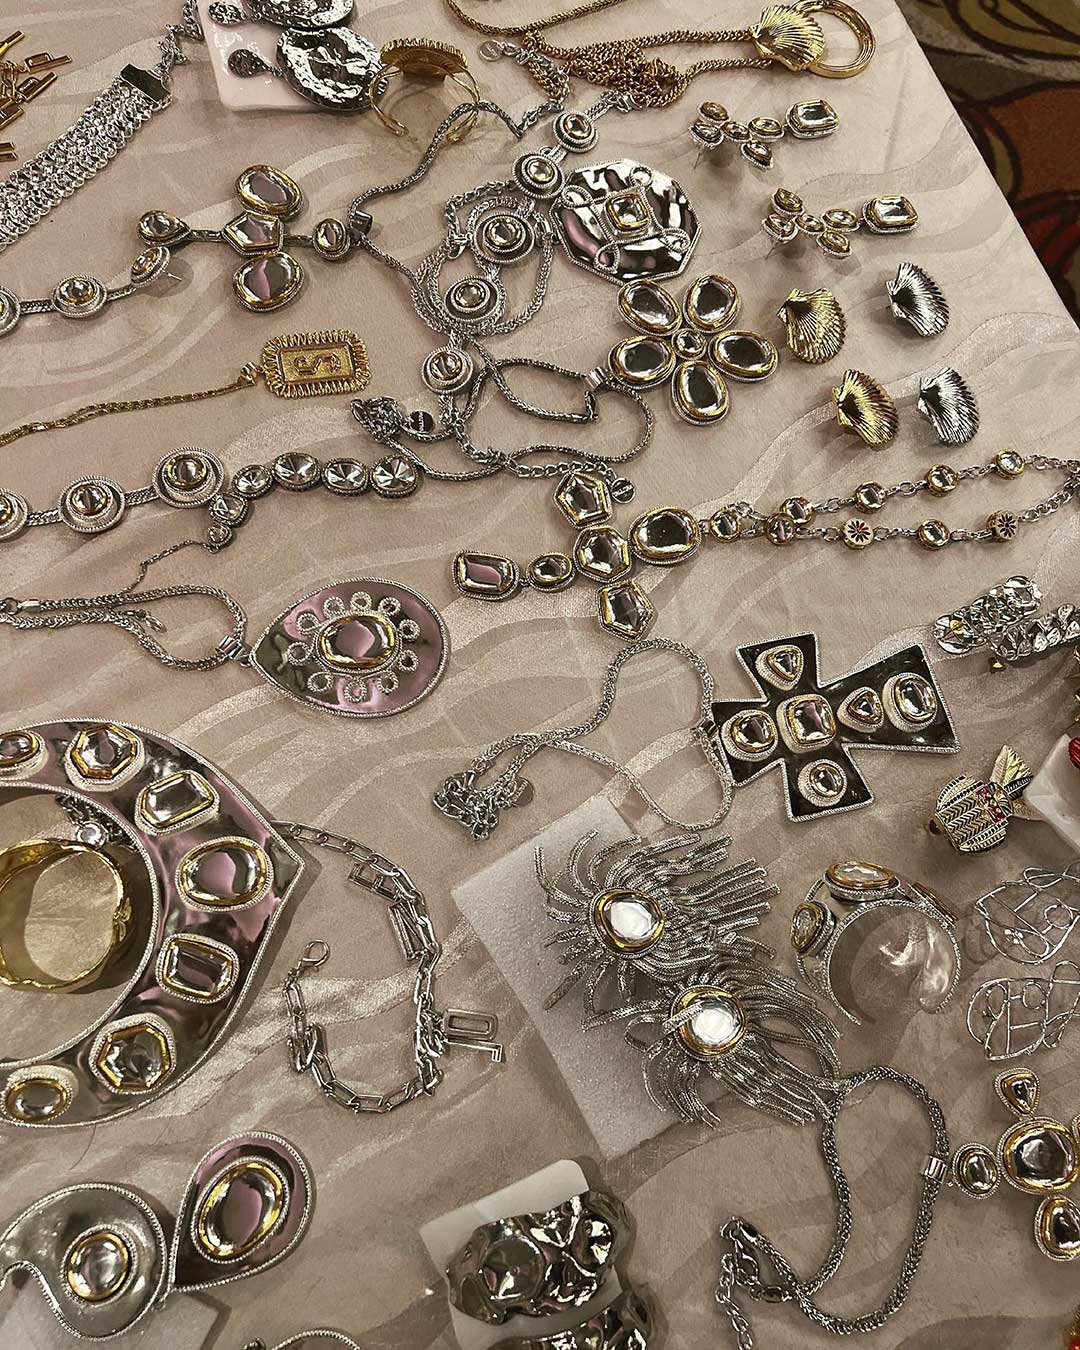 Jewellery on display on a white cloth at Valliyan boutique in Mumbai.